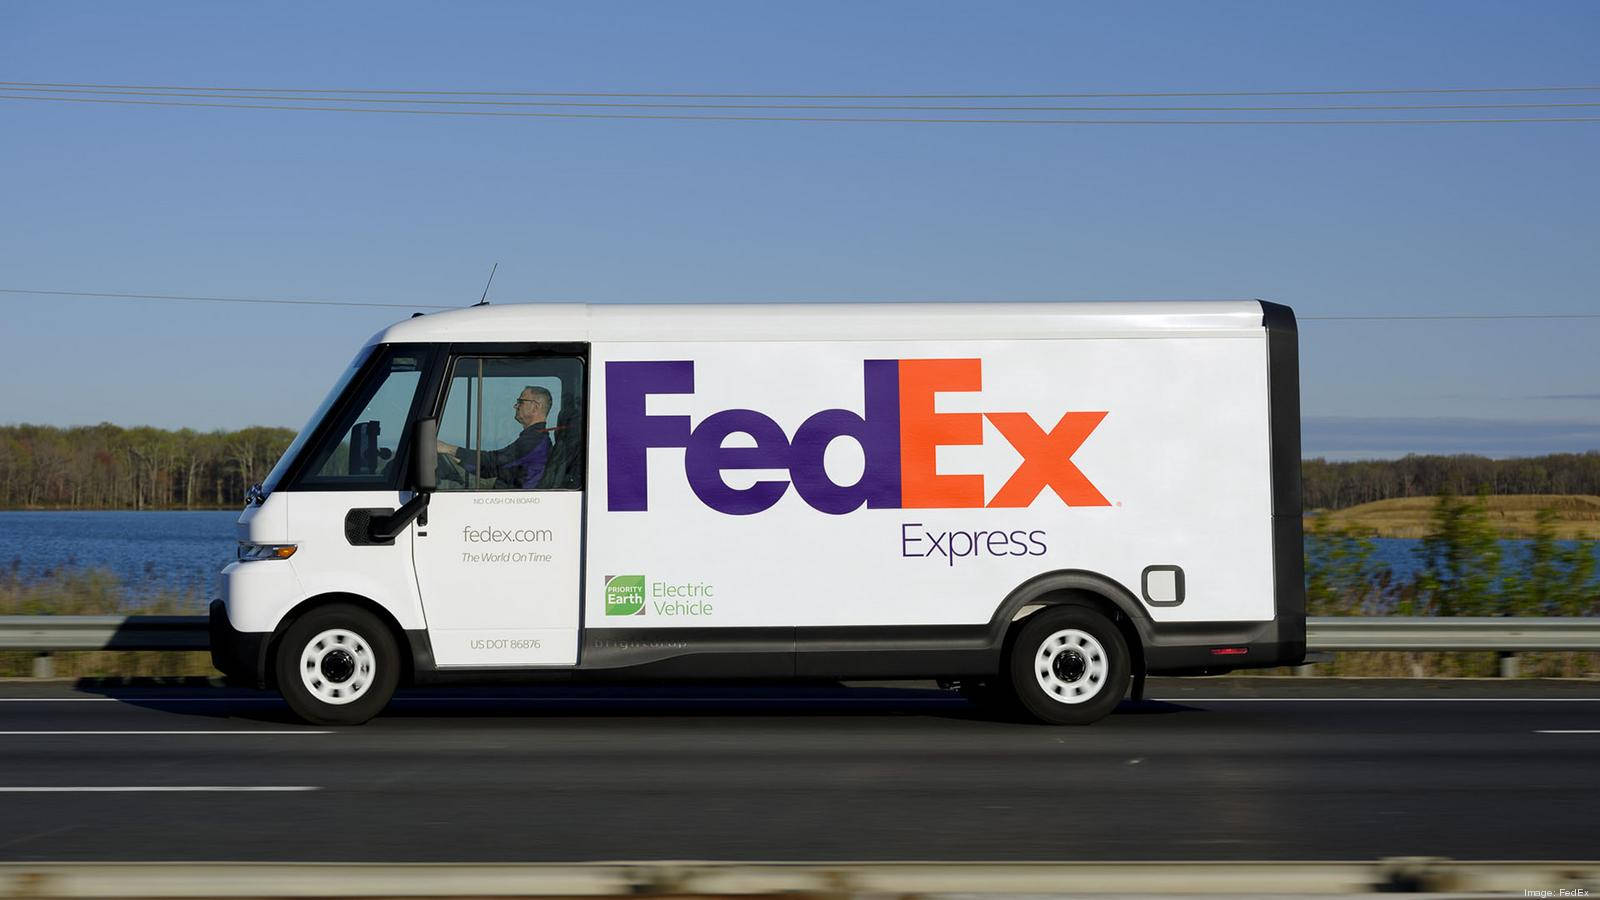 Download Fedex Tracking Delivery Vehicle Wallpaper 